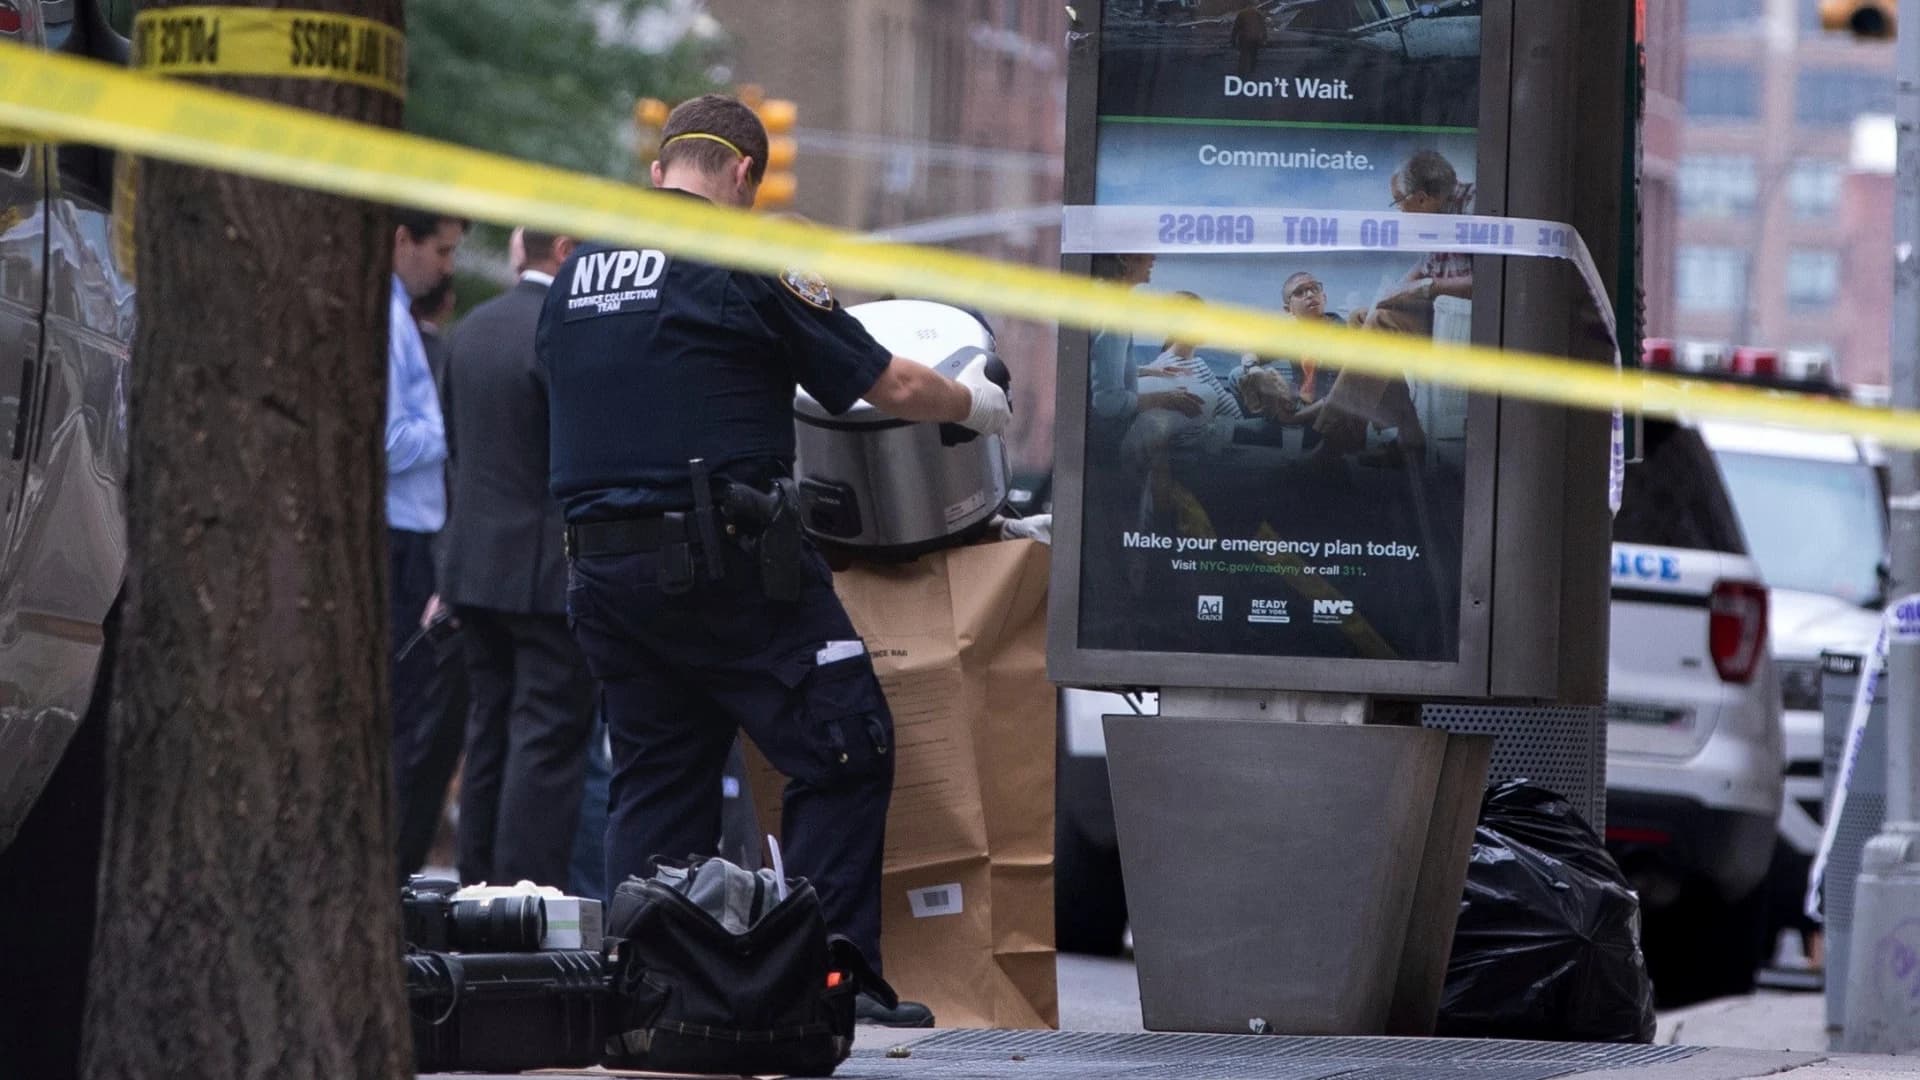 Police take person of interest into custody in NYC subway scare